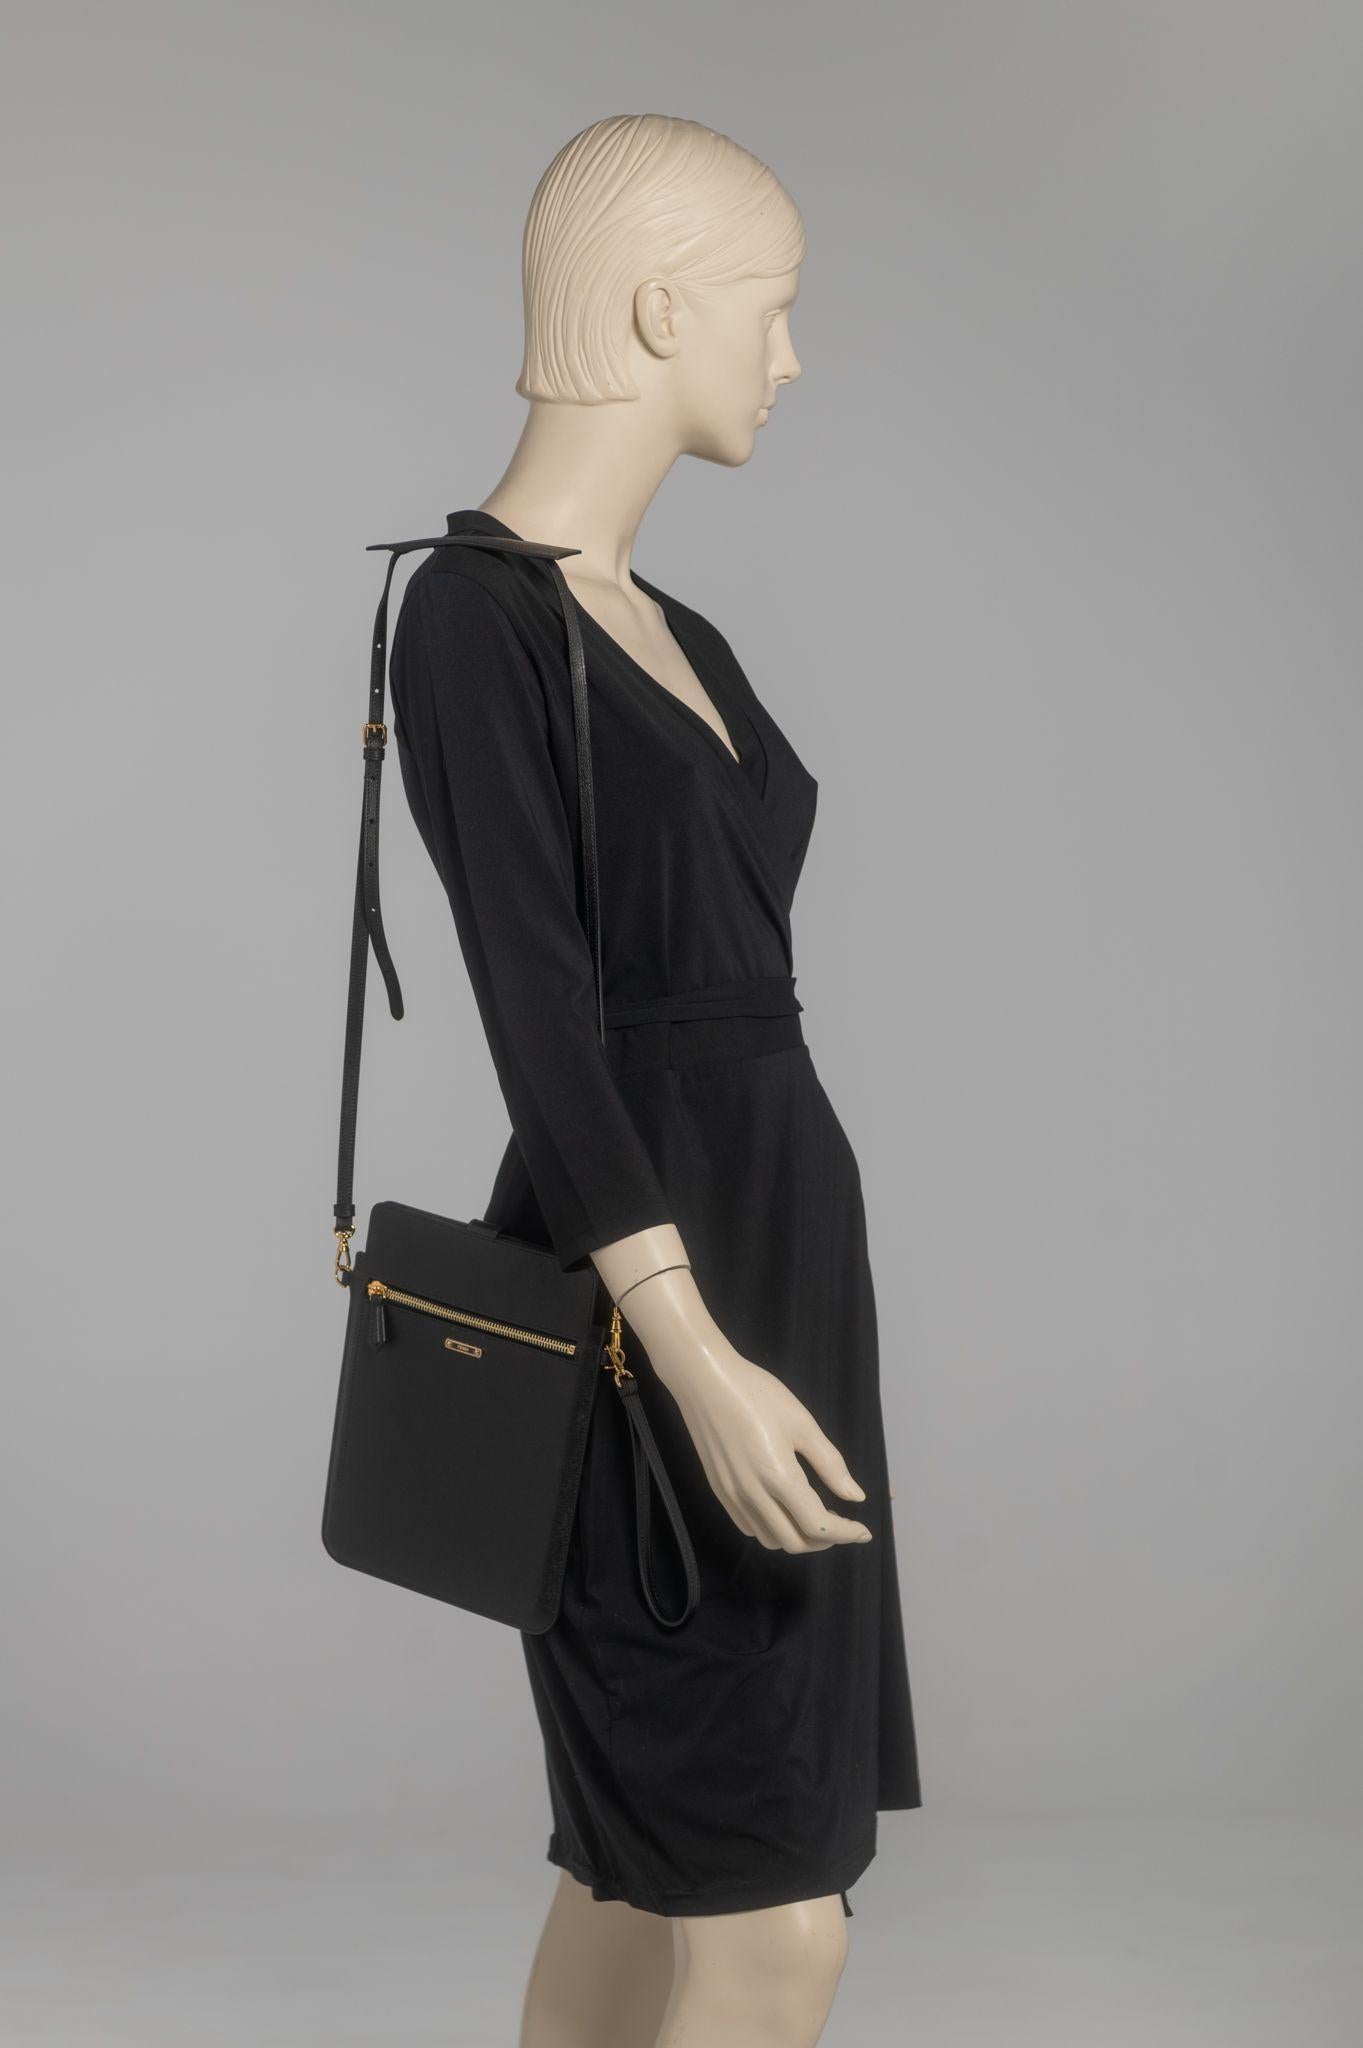 Fendi New Black Shoulder Flat Bag In New Condition For Sale In West Hollywood, CA